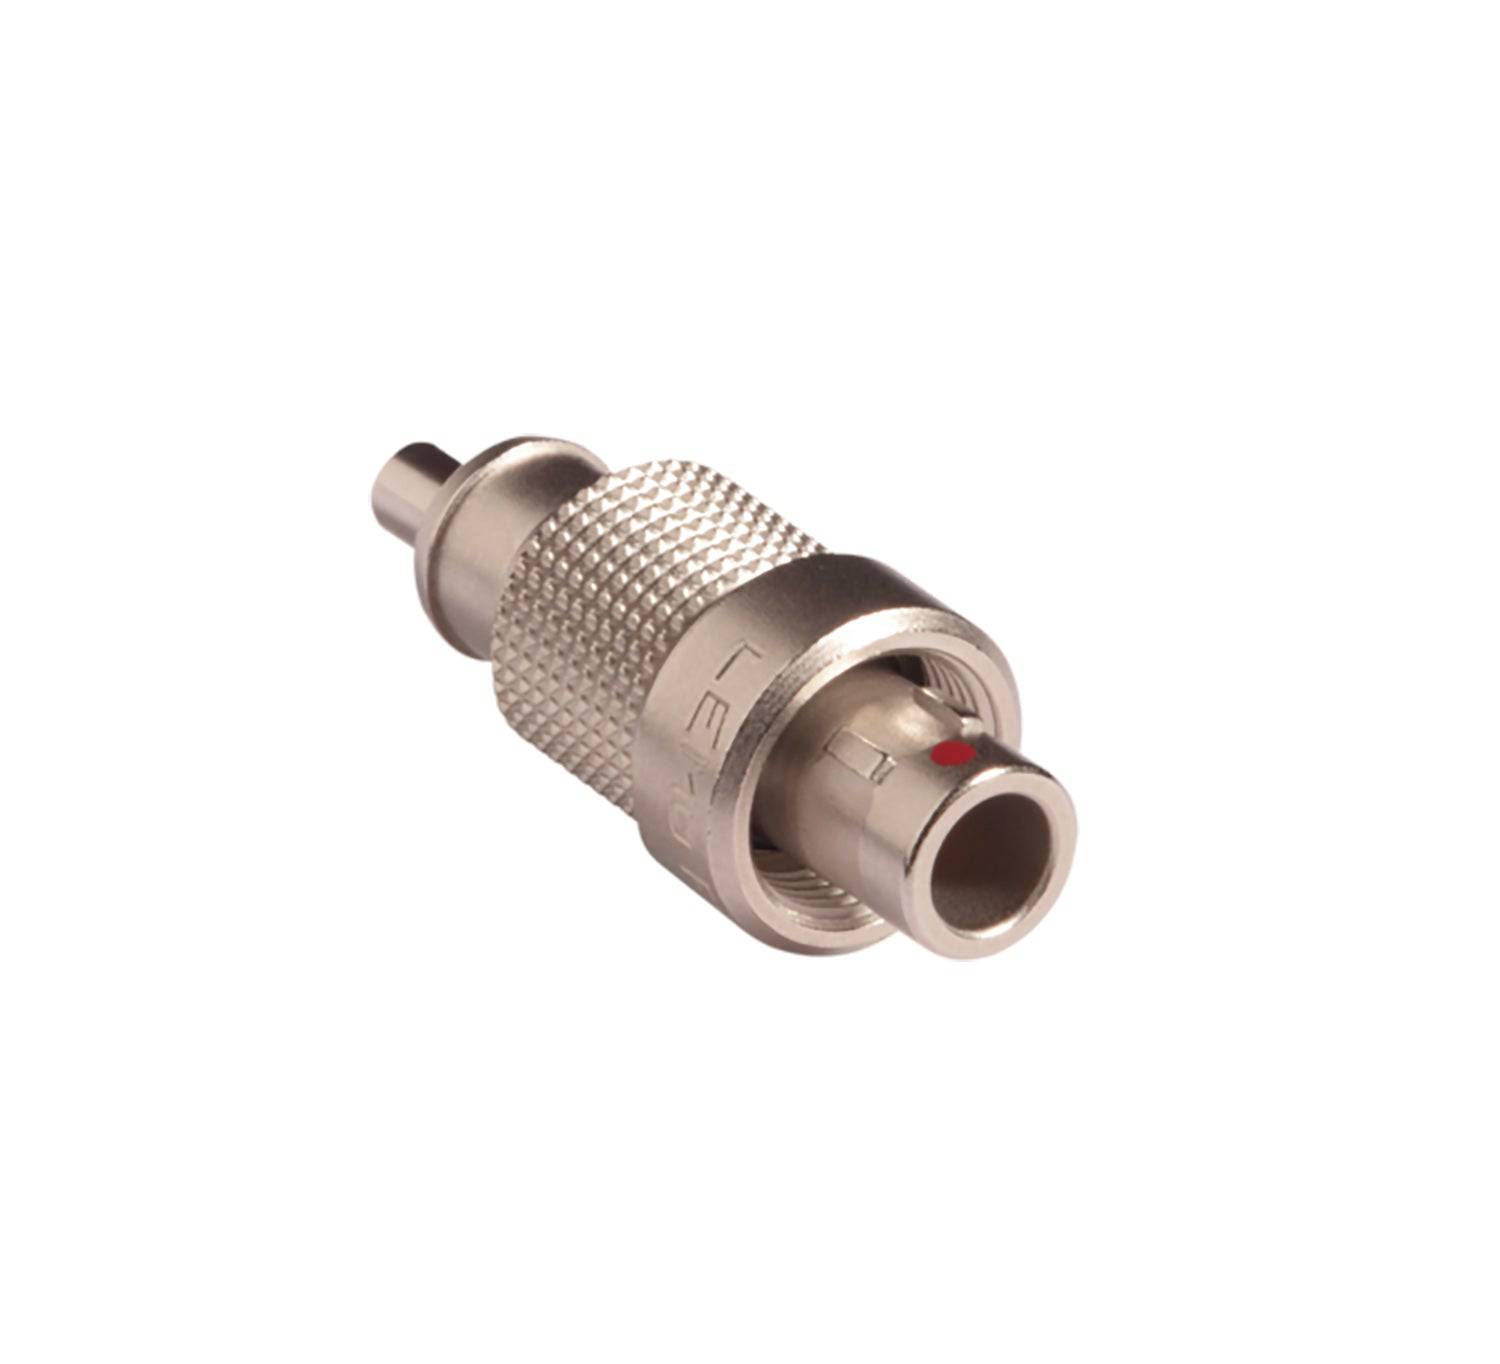 Shure WA416 Replacement LEMO3, 1.6mm Connector for TL46, TL47, TL48, TH53 - Hollywood DJ